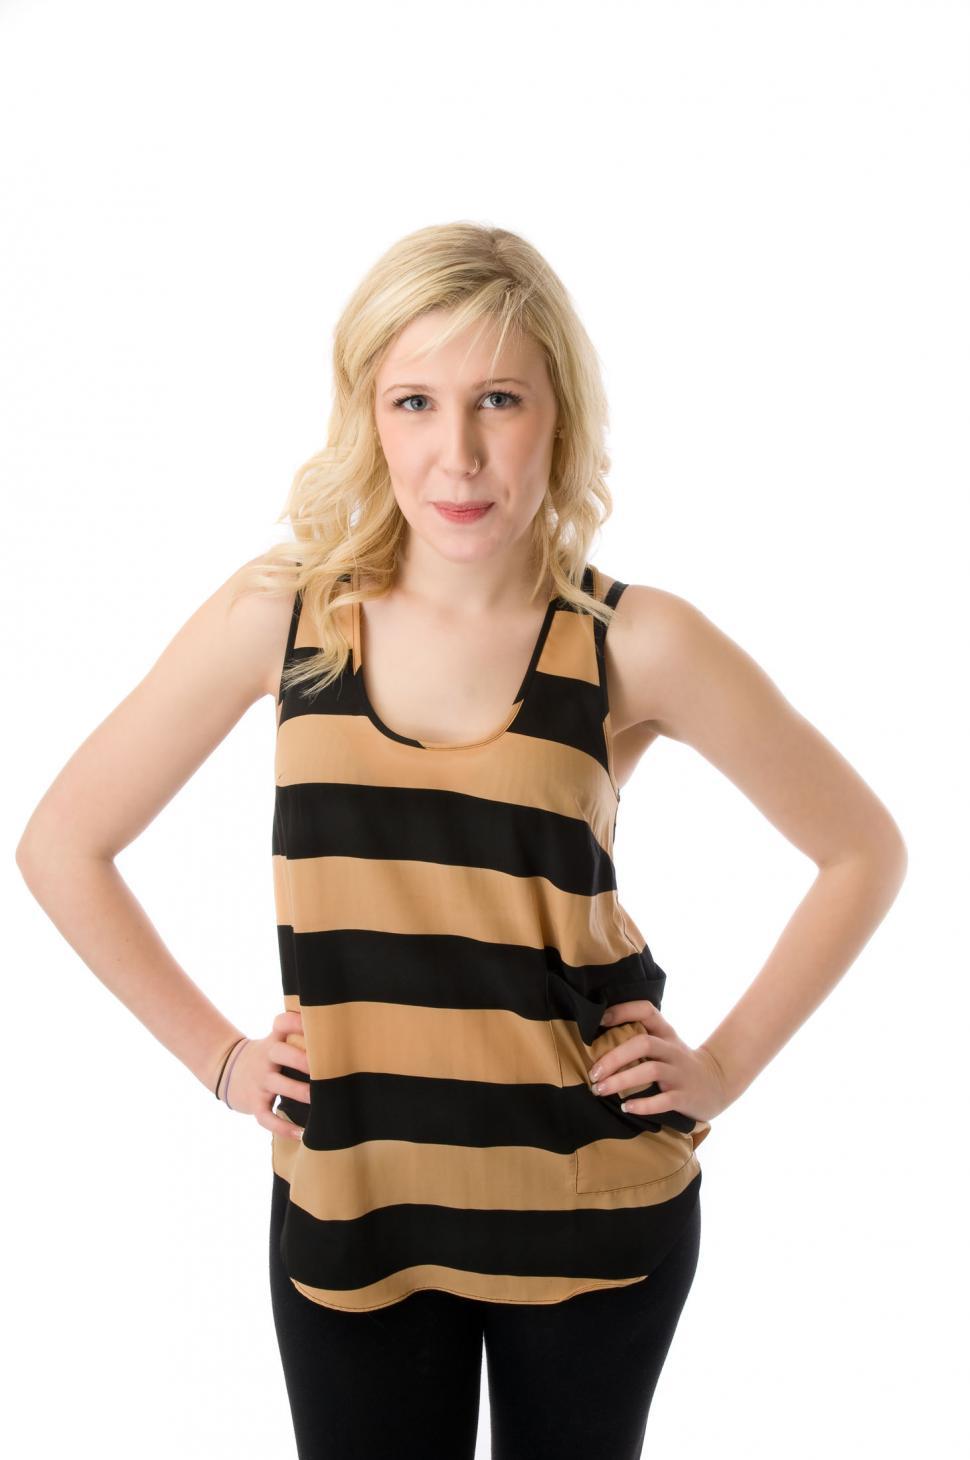 Free Image of Young Blond Woman Standing 